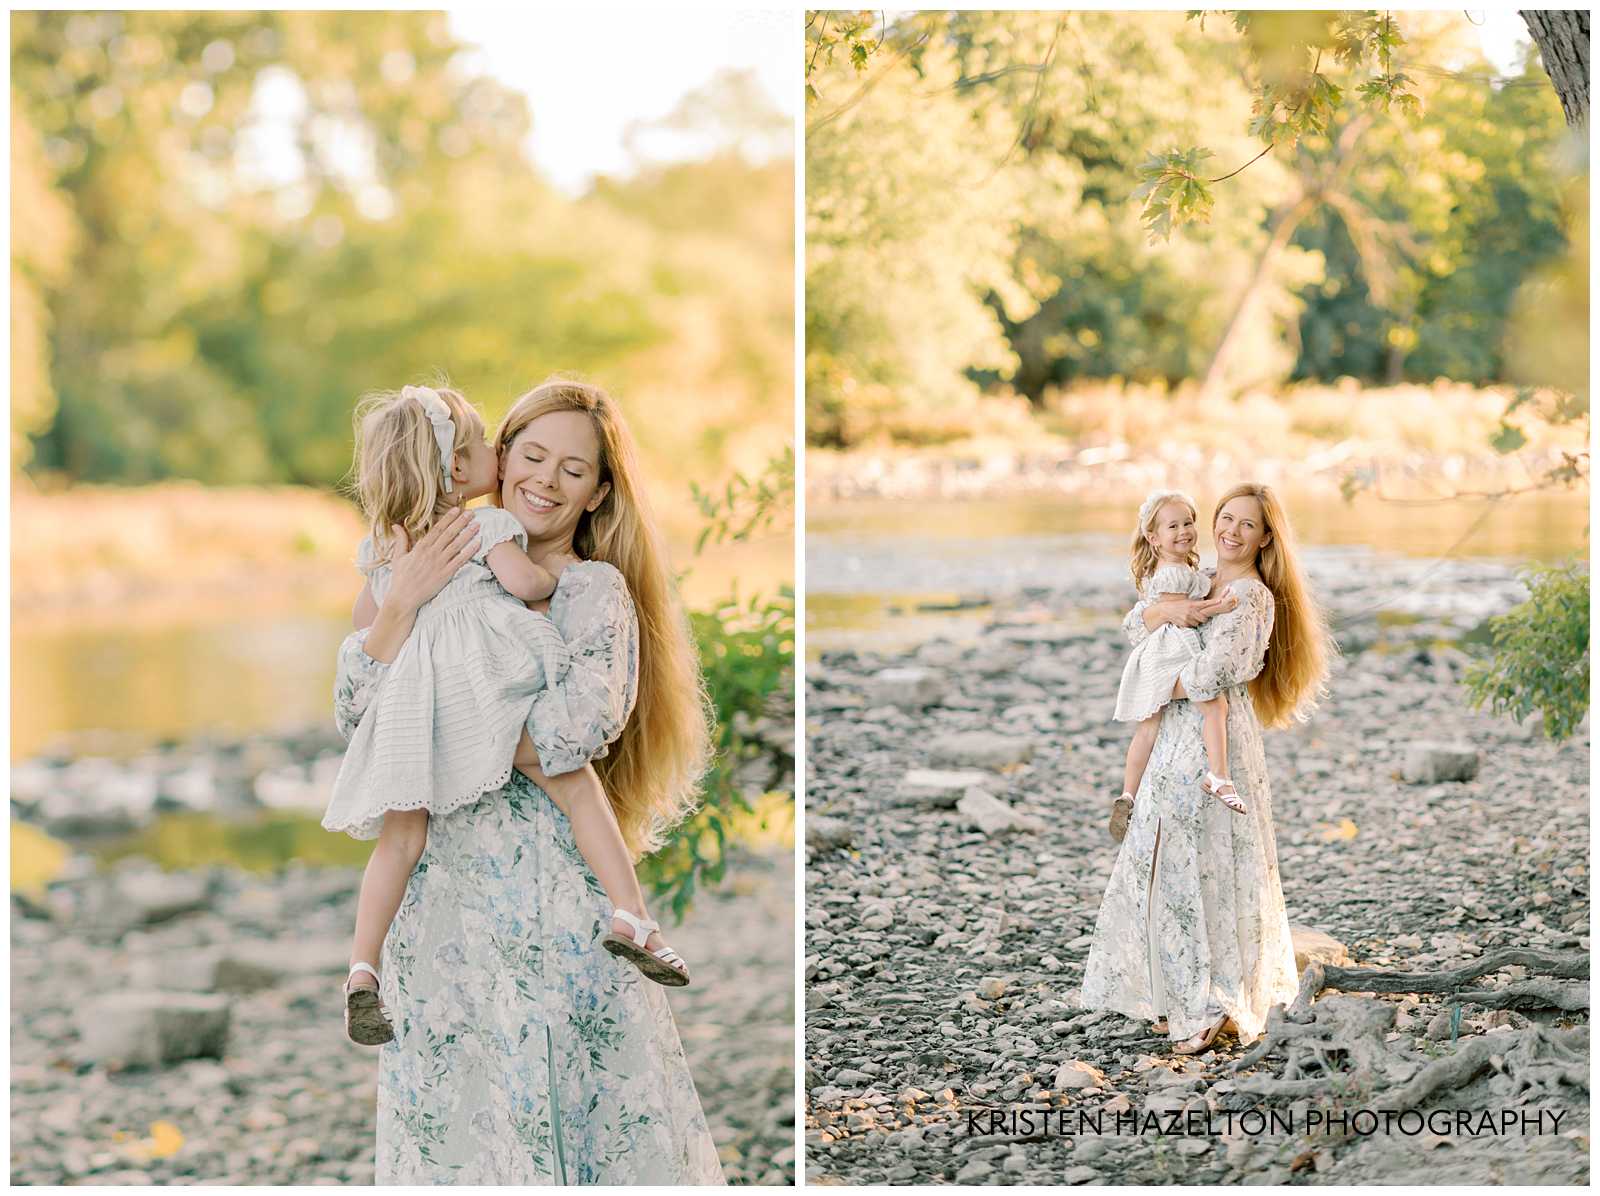 Mother and young daughter in white dresses at an Illinois park with water near Chicago.